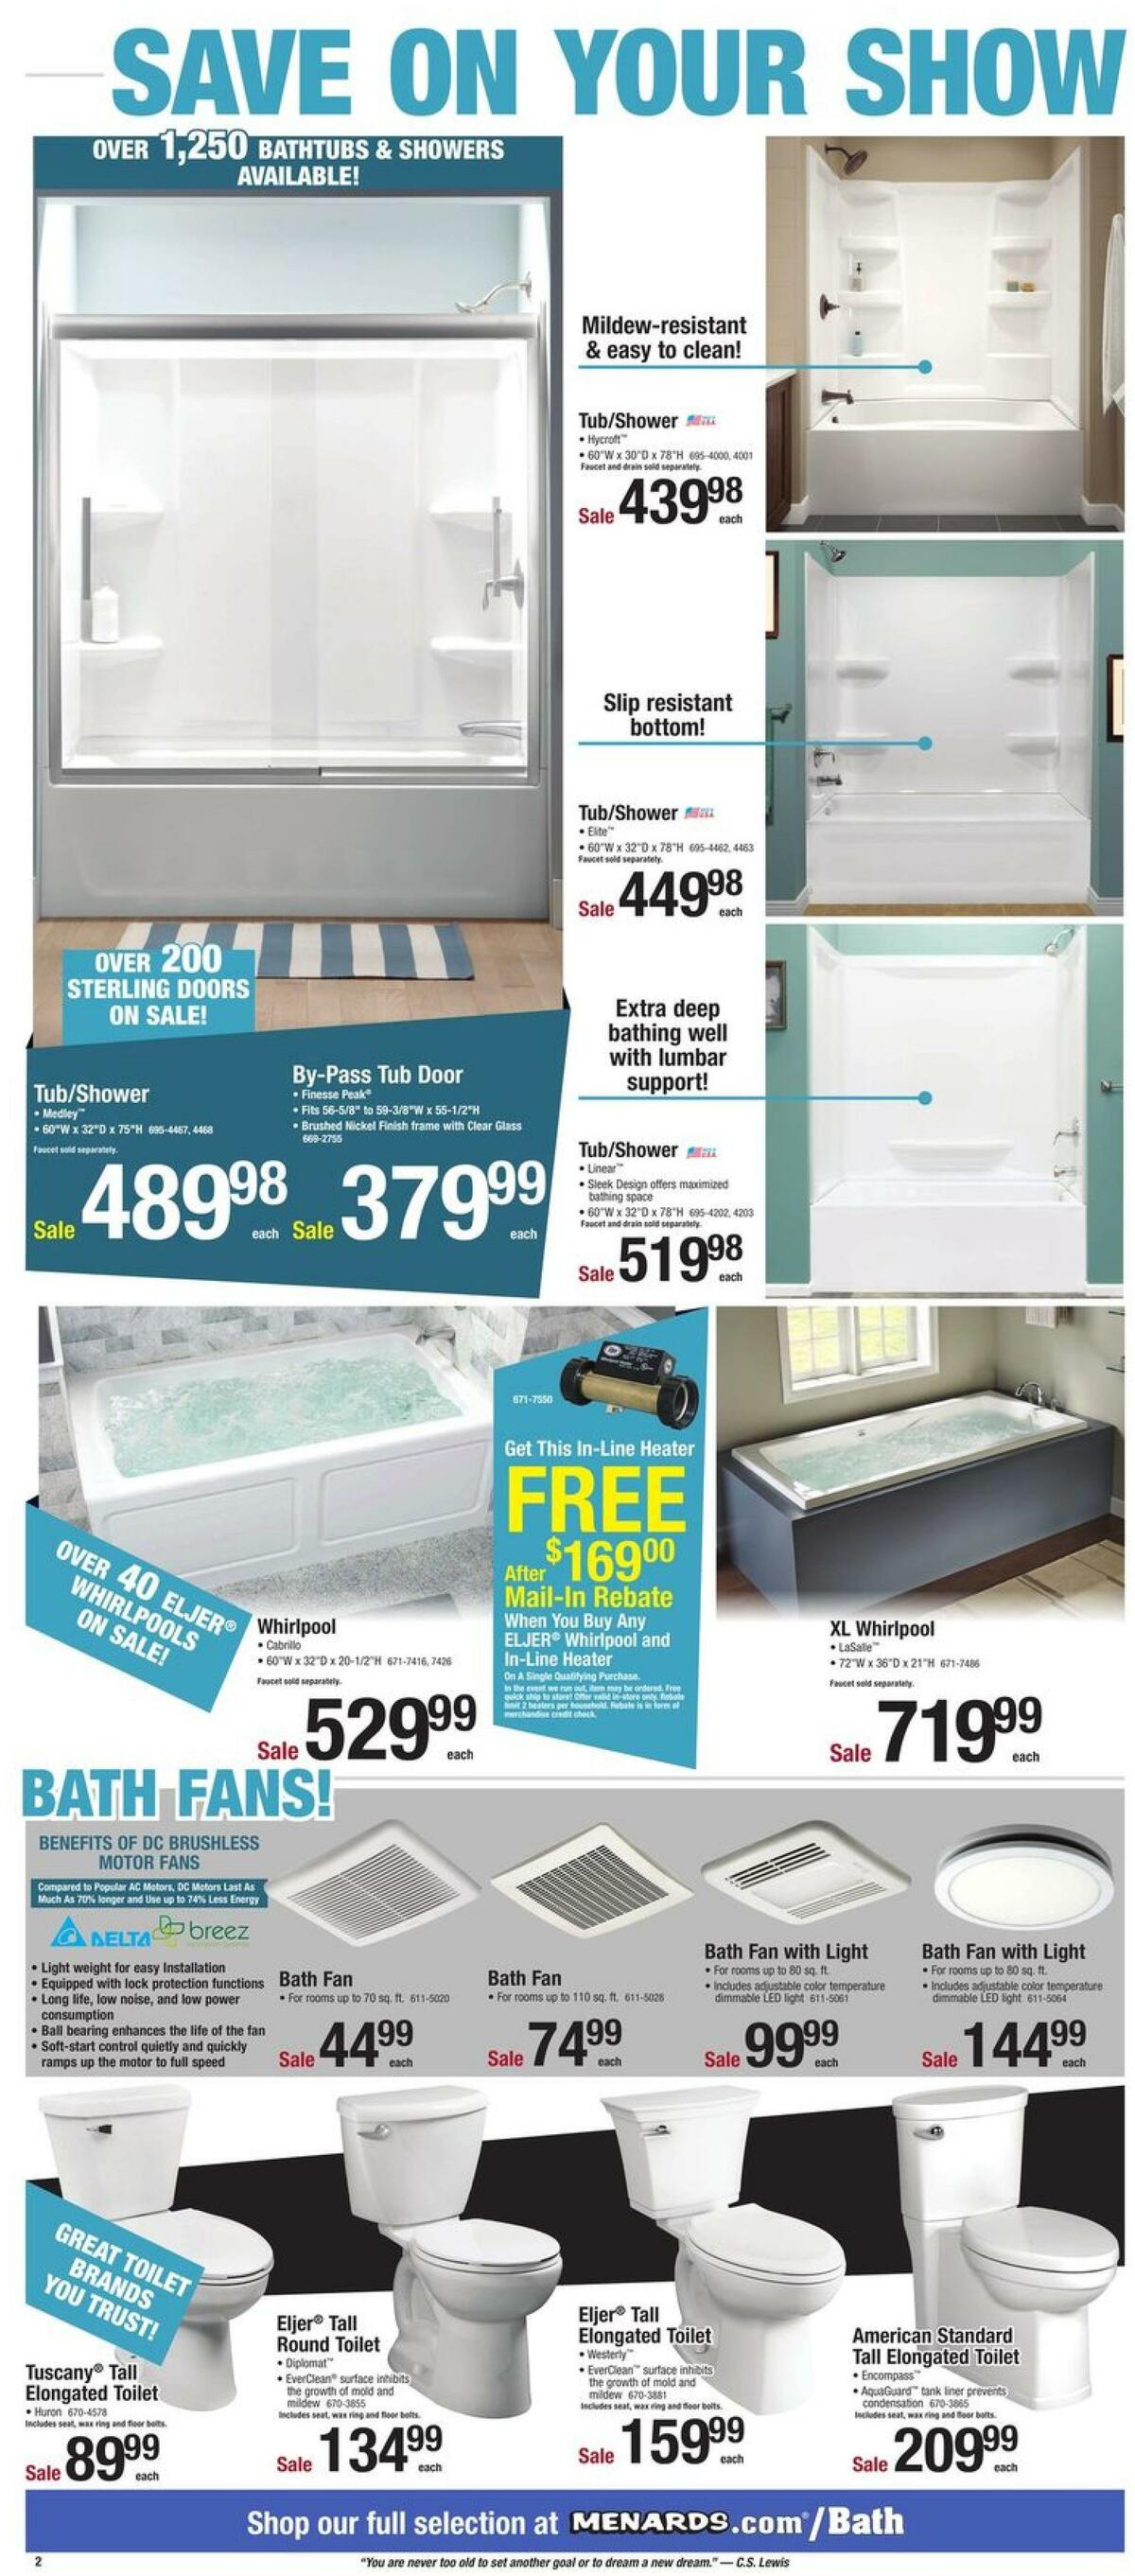 Menards Bath Weekly Ad from January 17